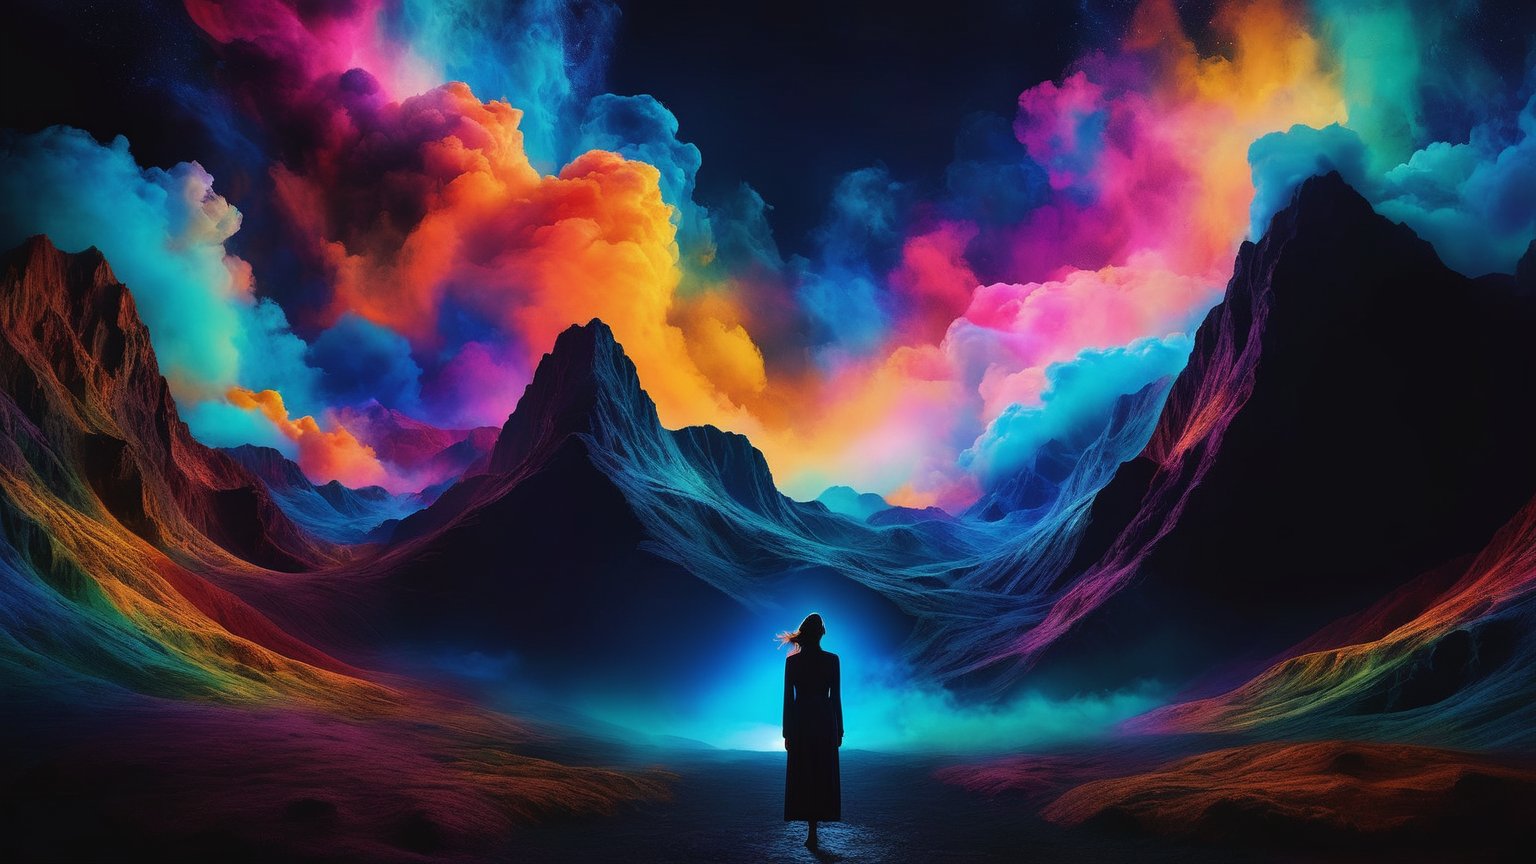 make me some abstract landscapes with a woman in astral projection
dark mode,wide background.,Movie Still,photo r3al